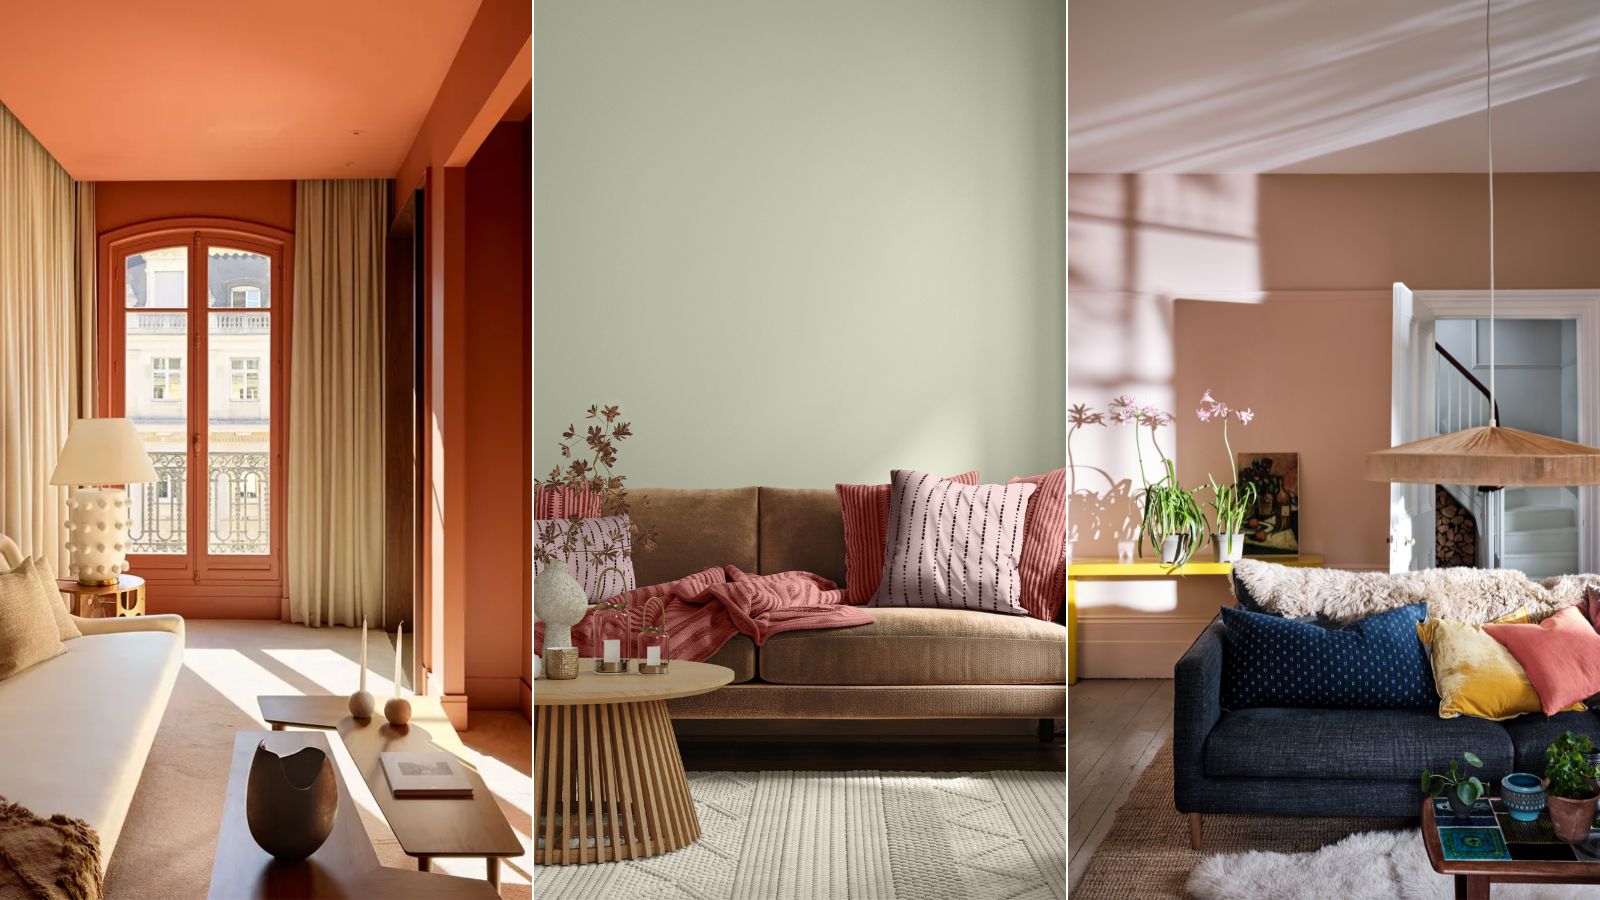 The 5 Best Coral Paint Colors to Add Warmth to Your Home